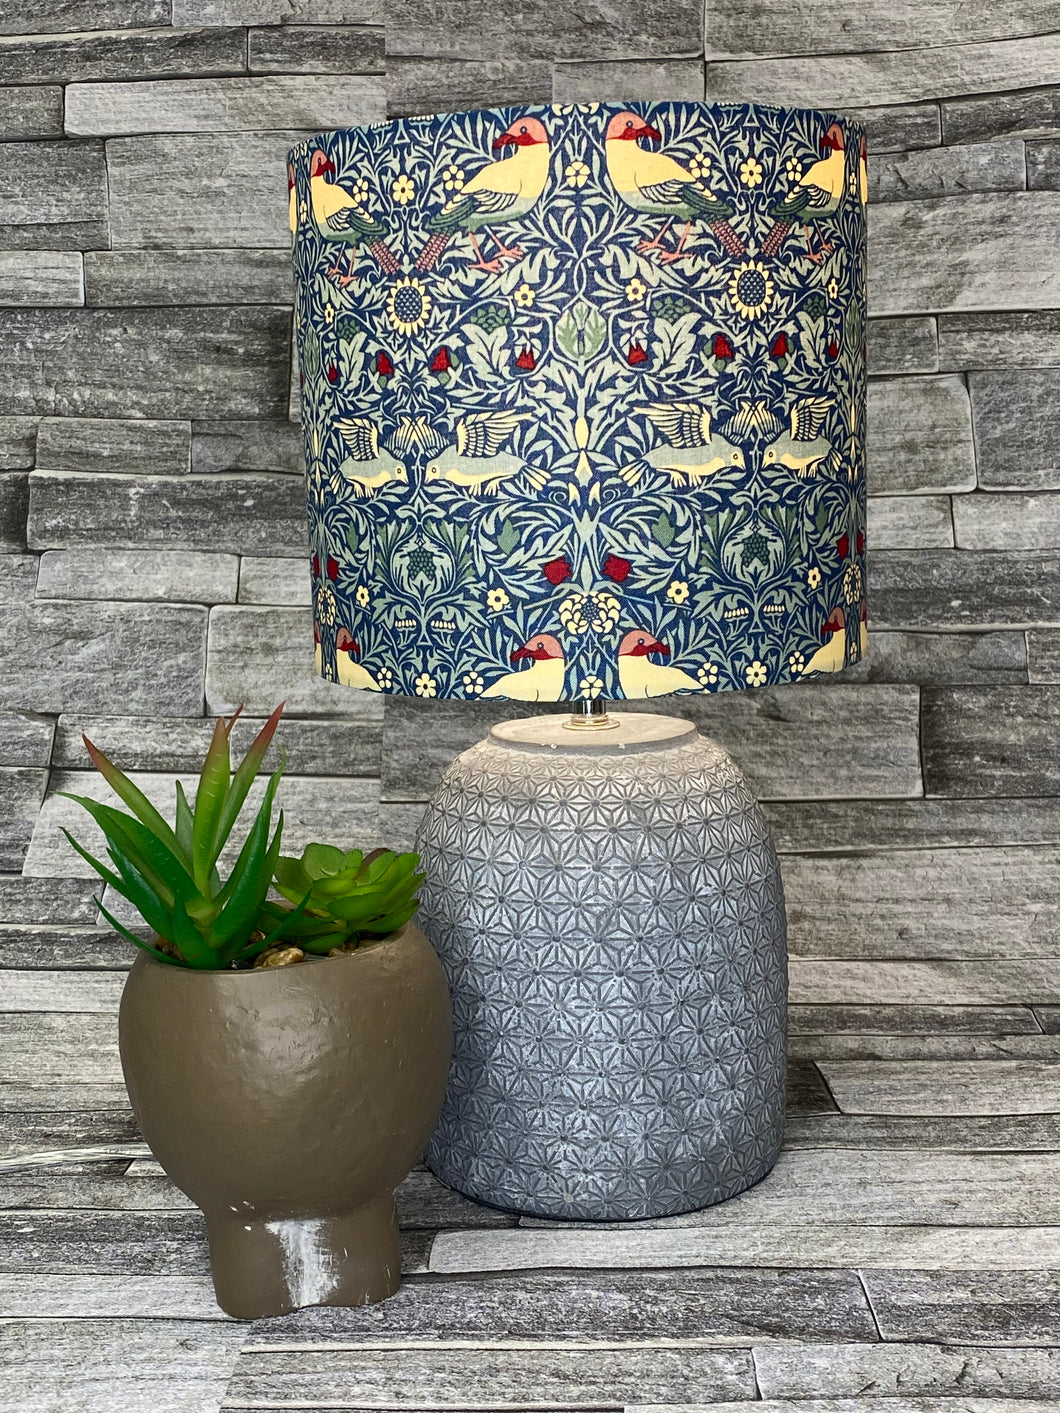 Drum Lampshade - William Morris - Bird Winter Berry - Blue - Butterfly Crafts